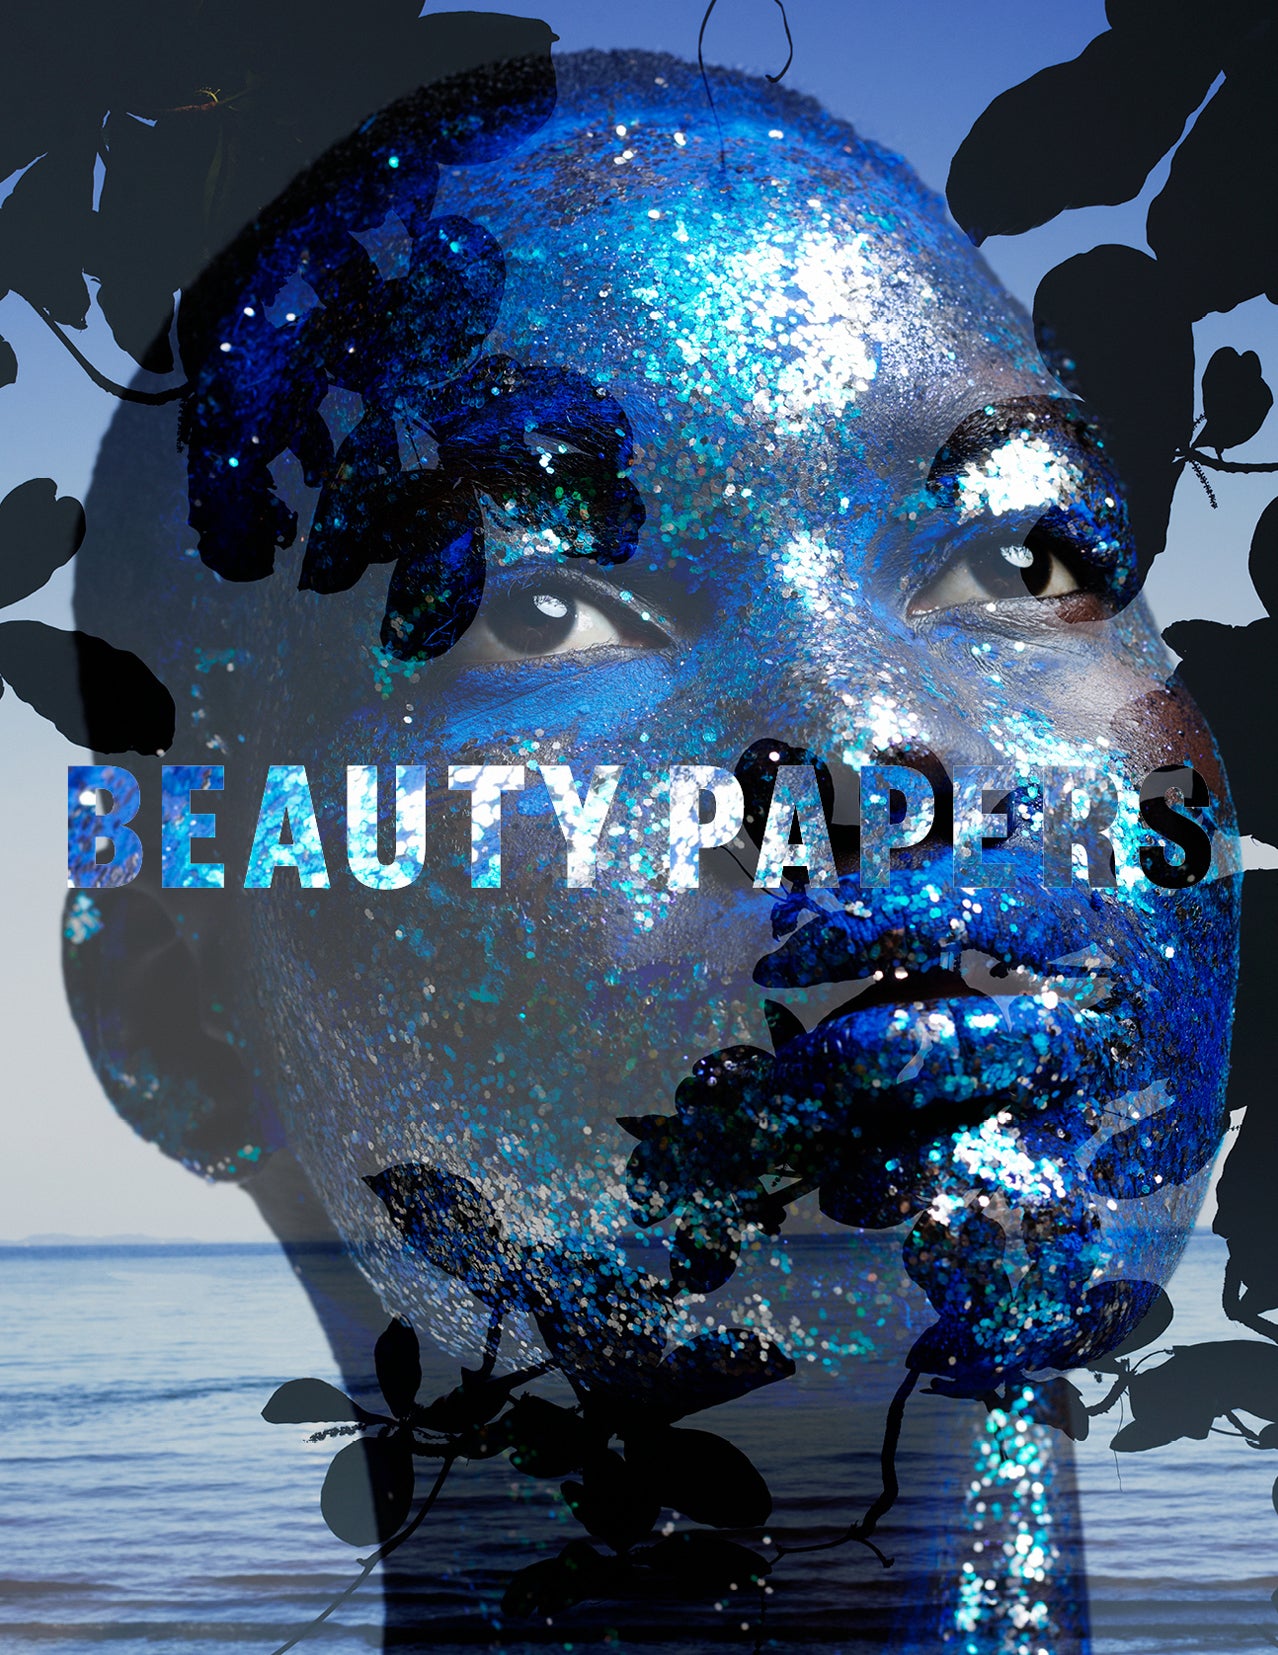 Beauty Papers - Issue 11 